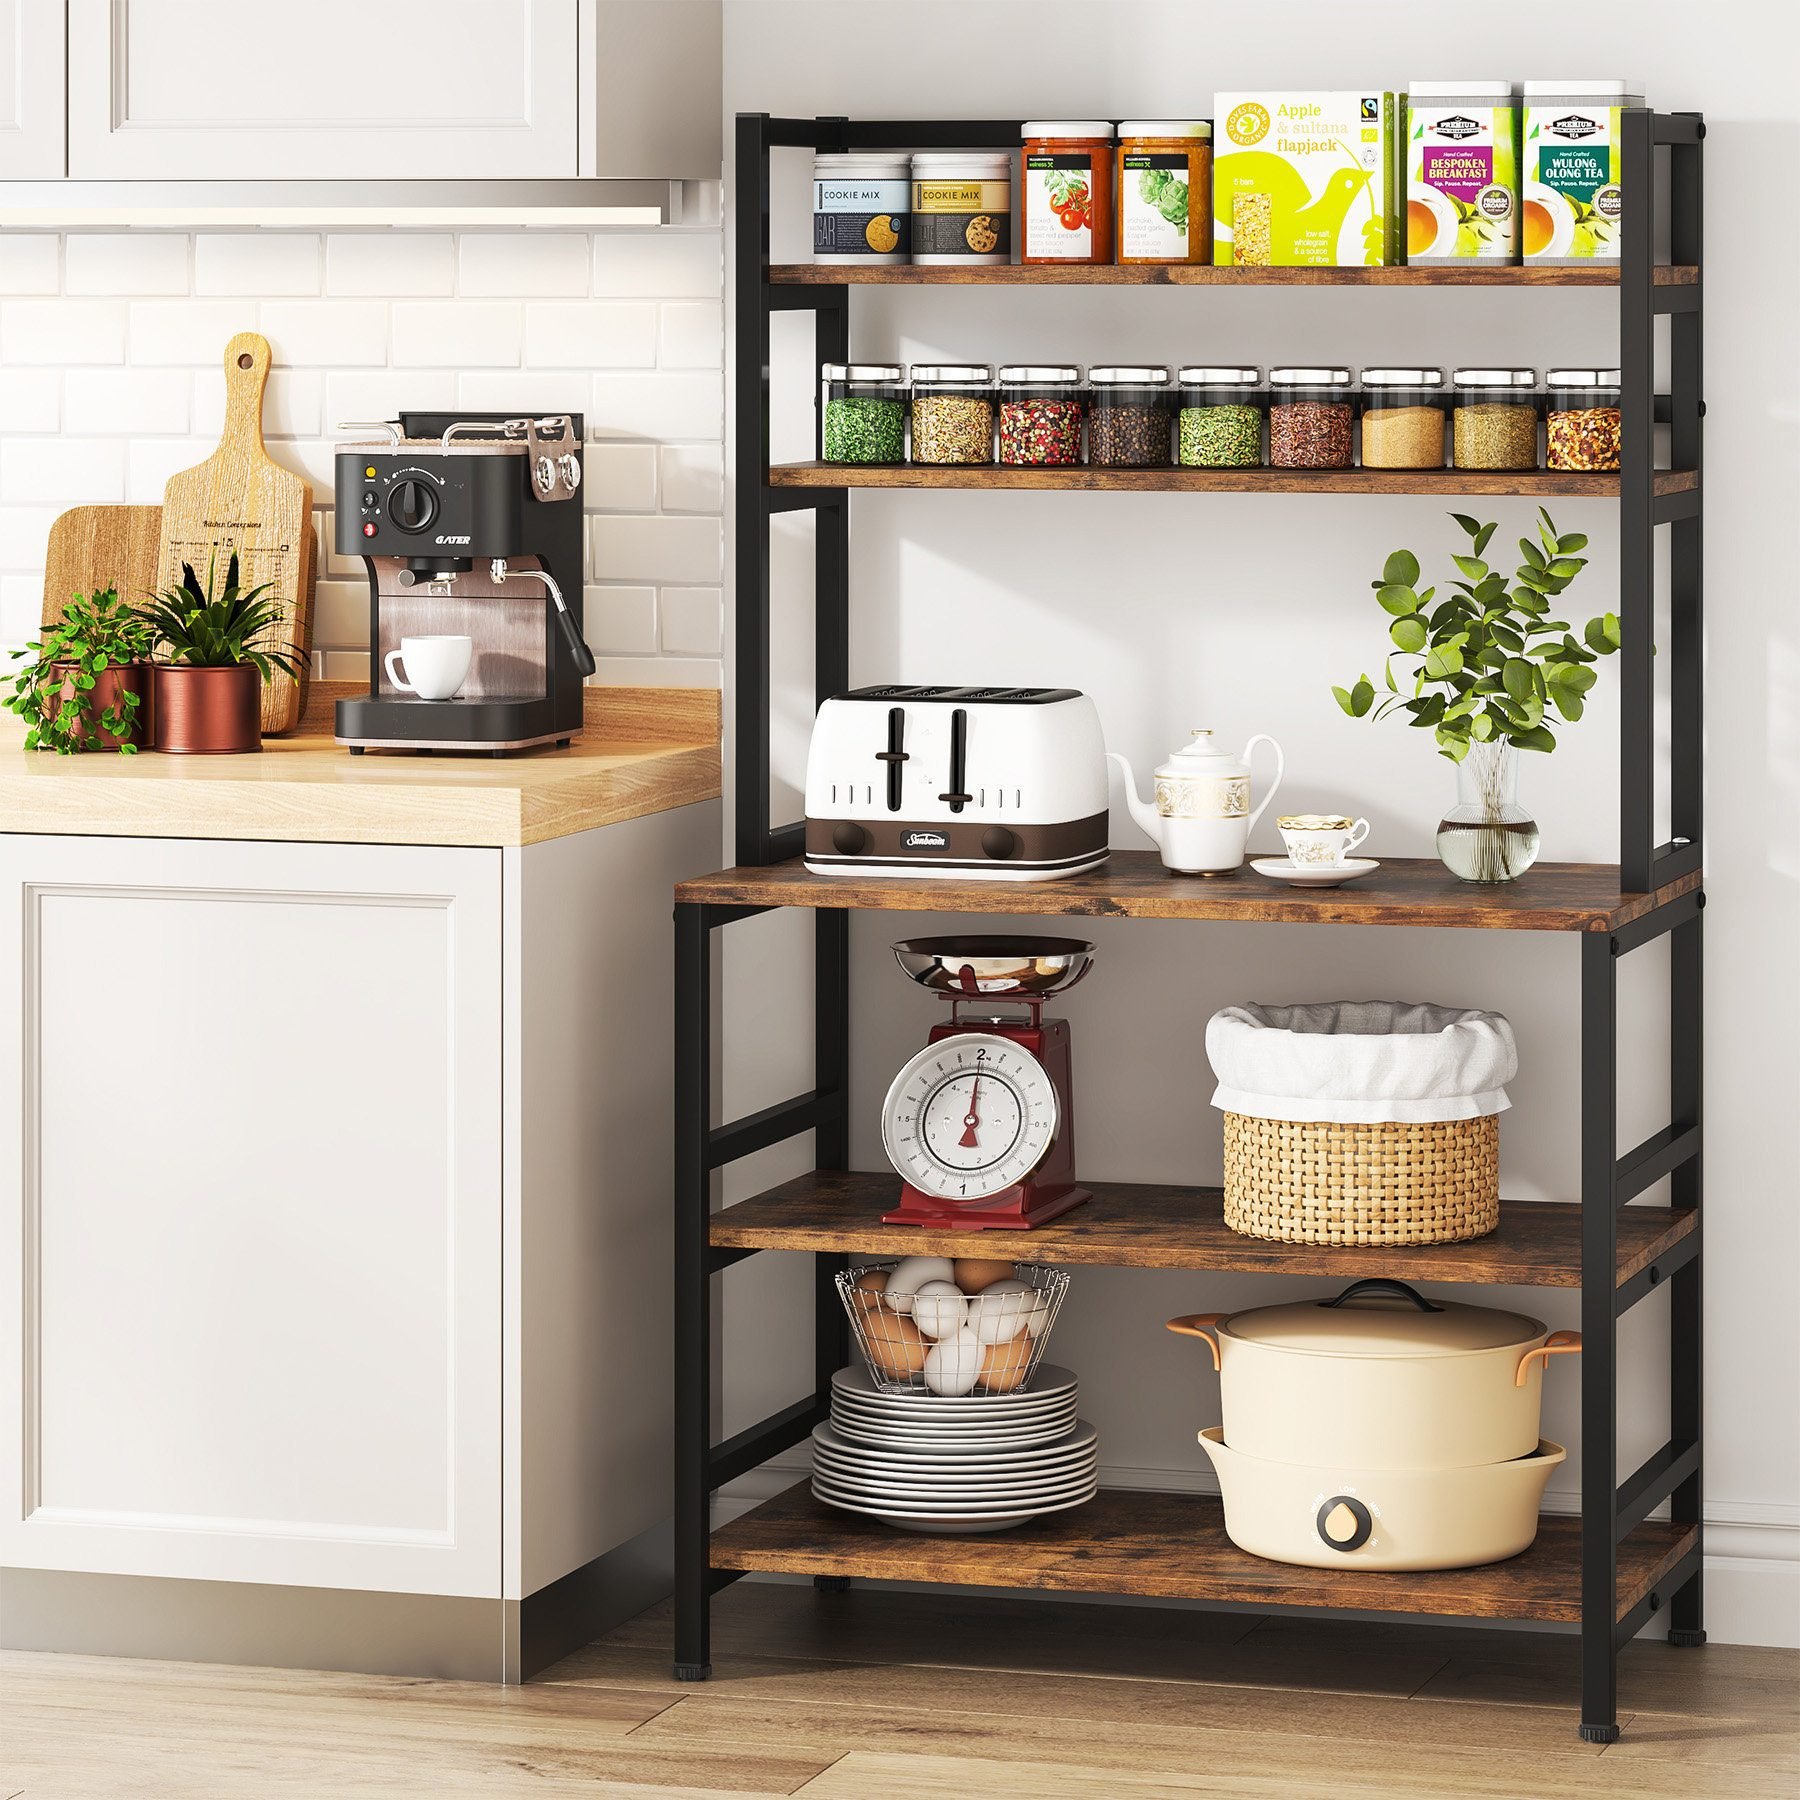 17 Stories Geyer 31.5in Iron Standard Bakers Rack With Microwave Compatibility Ecomm Via Wayfair.com  ?w=1800